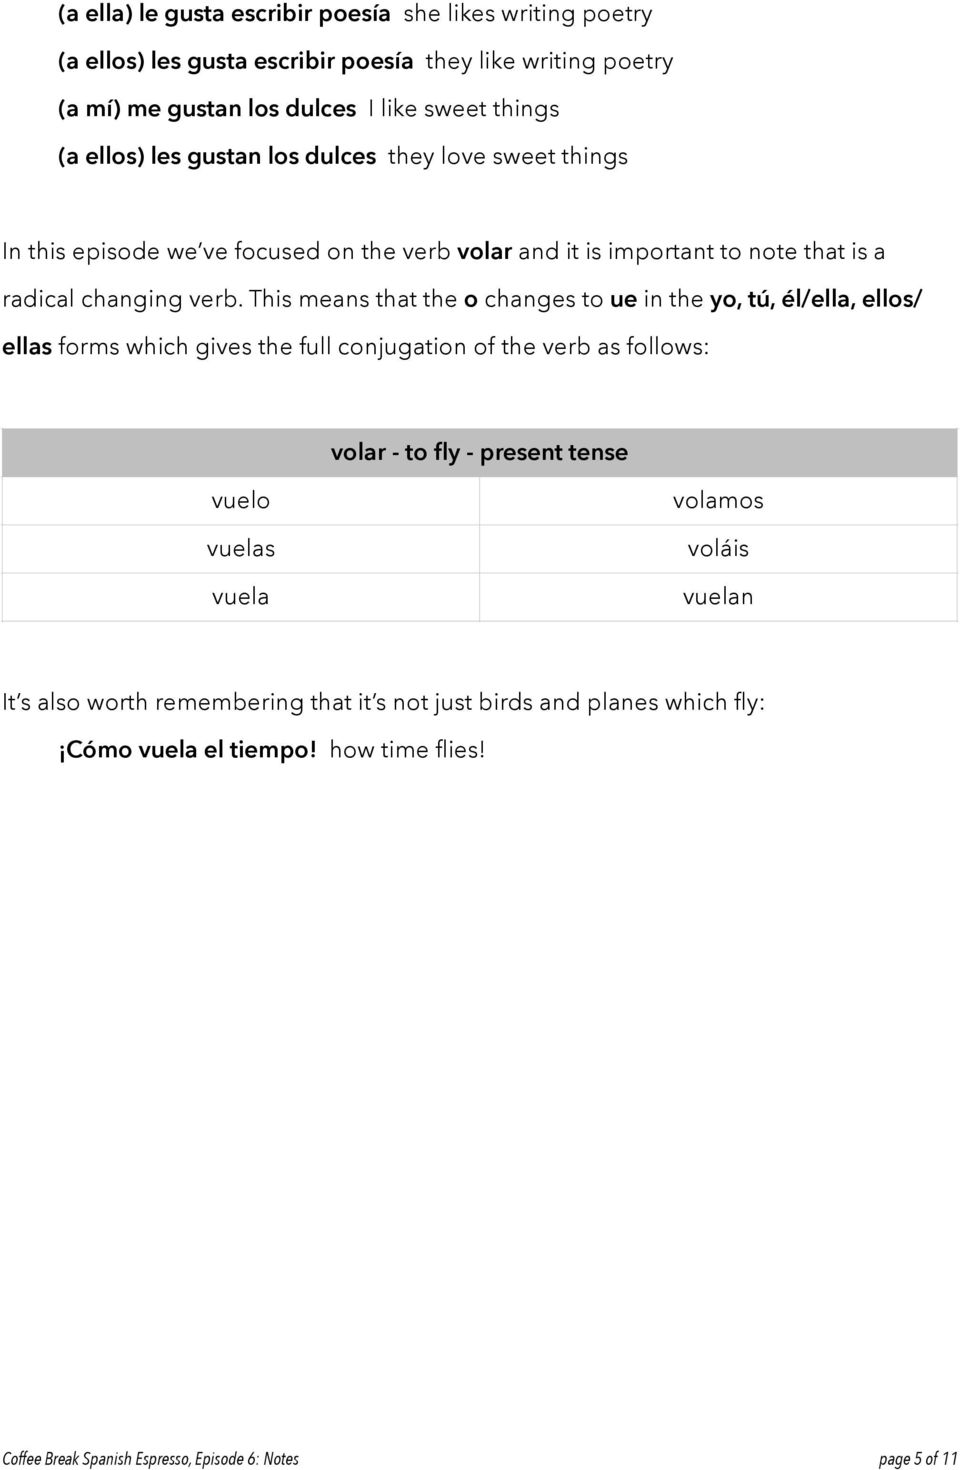 This means that the o changes to ue in the yo, tú, él/ella, ellos/ ellas forms which gives the full conjugation of the verb as follows: volar - to fly - present tense vuelo